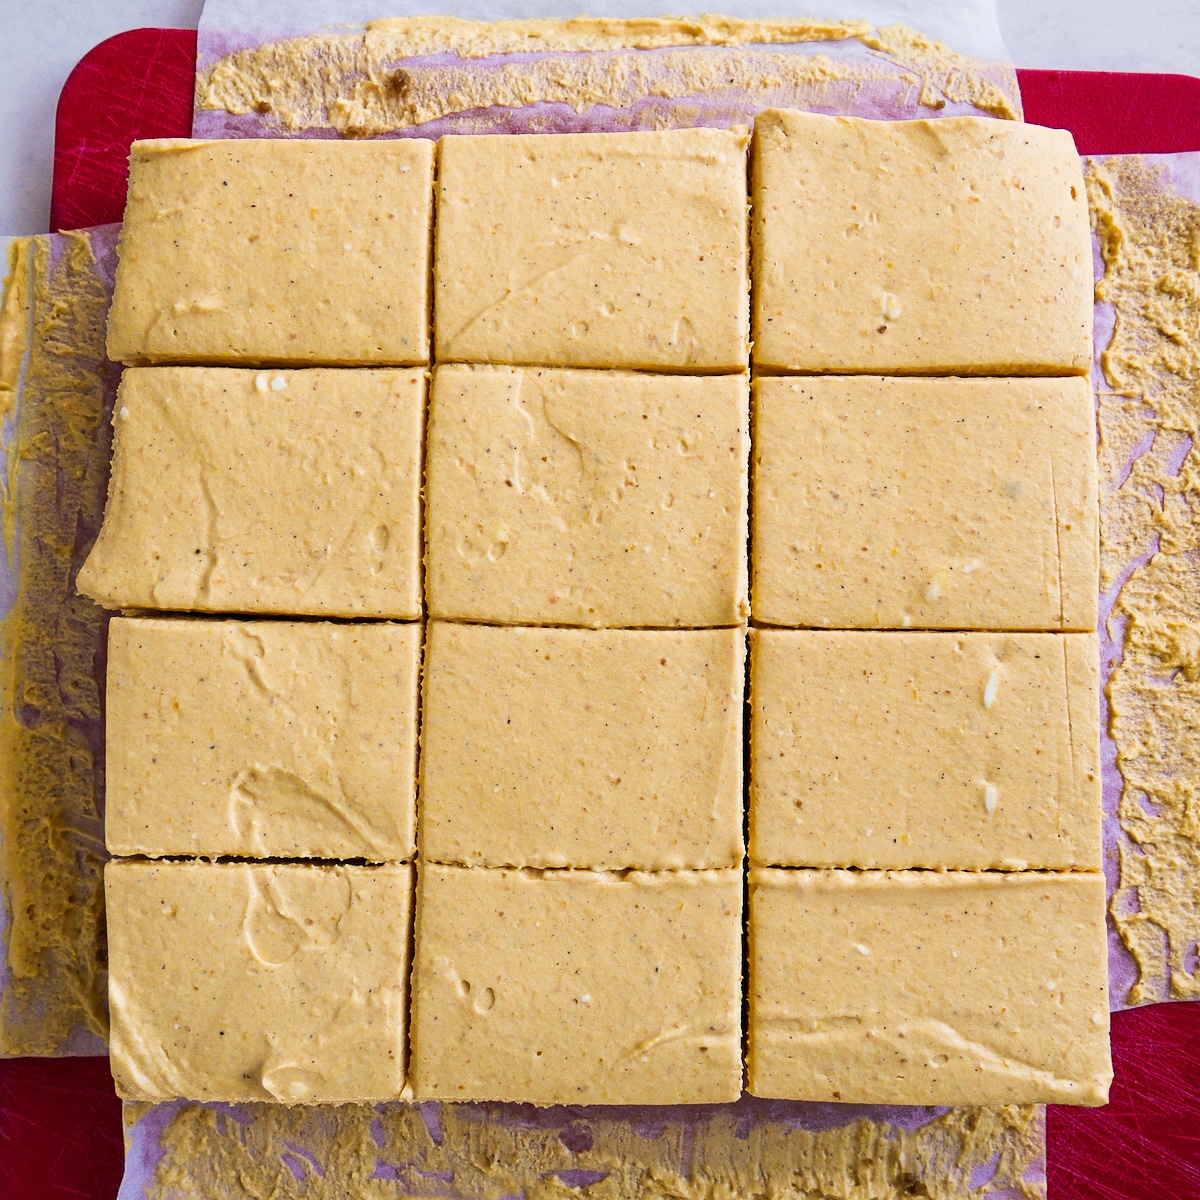 Pumpkin cheesecake bars cut cleanly into 12 slices.